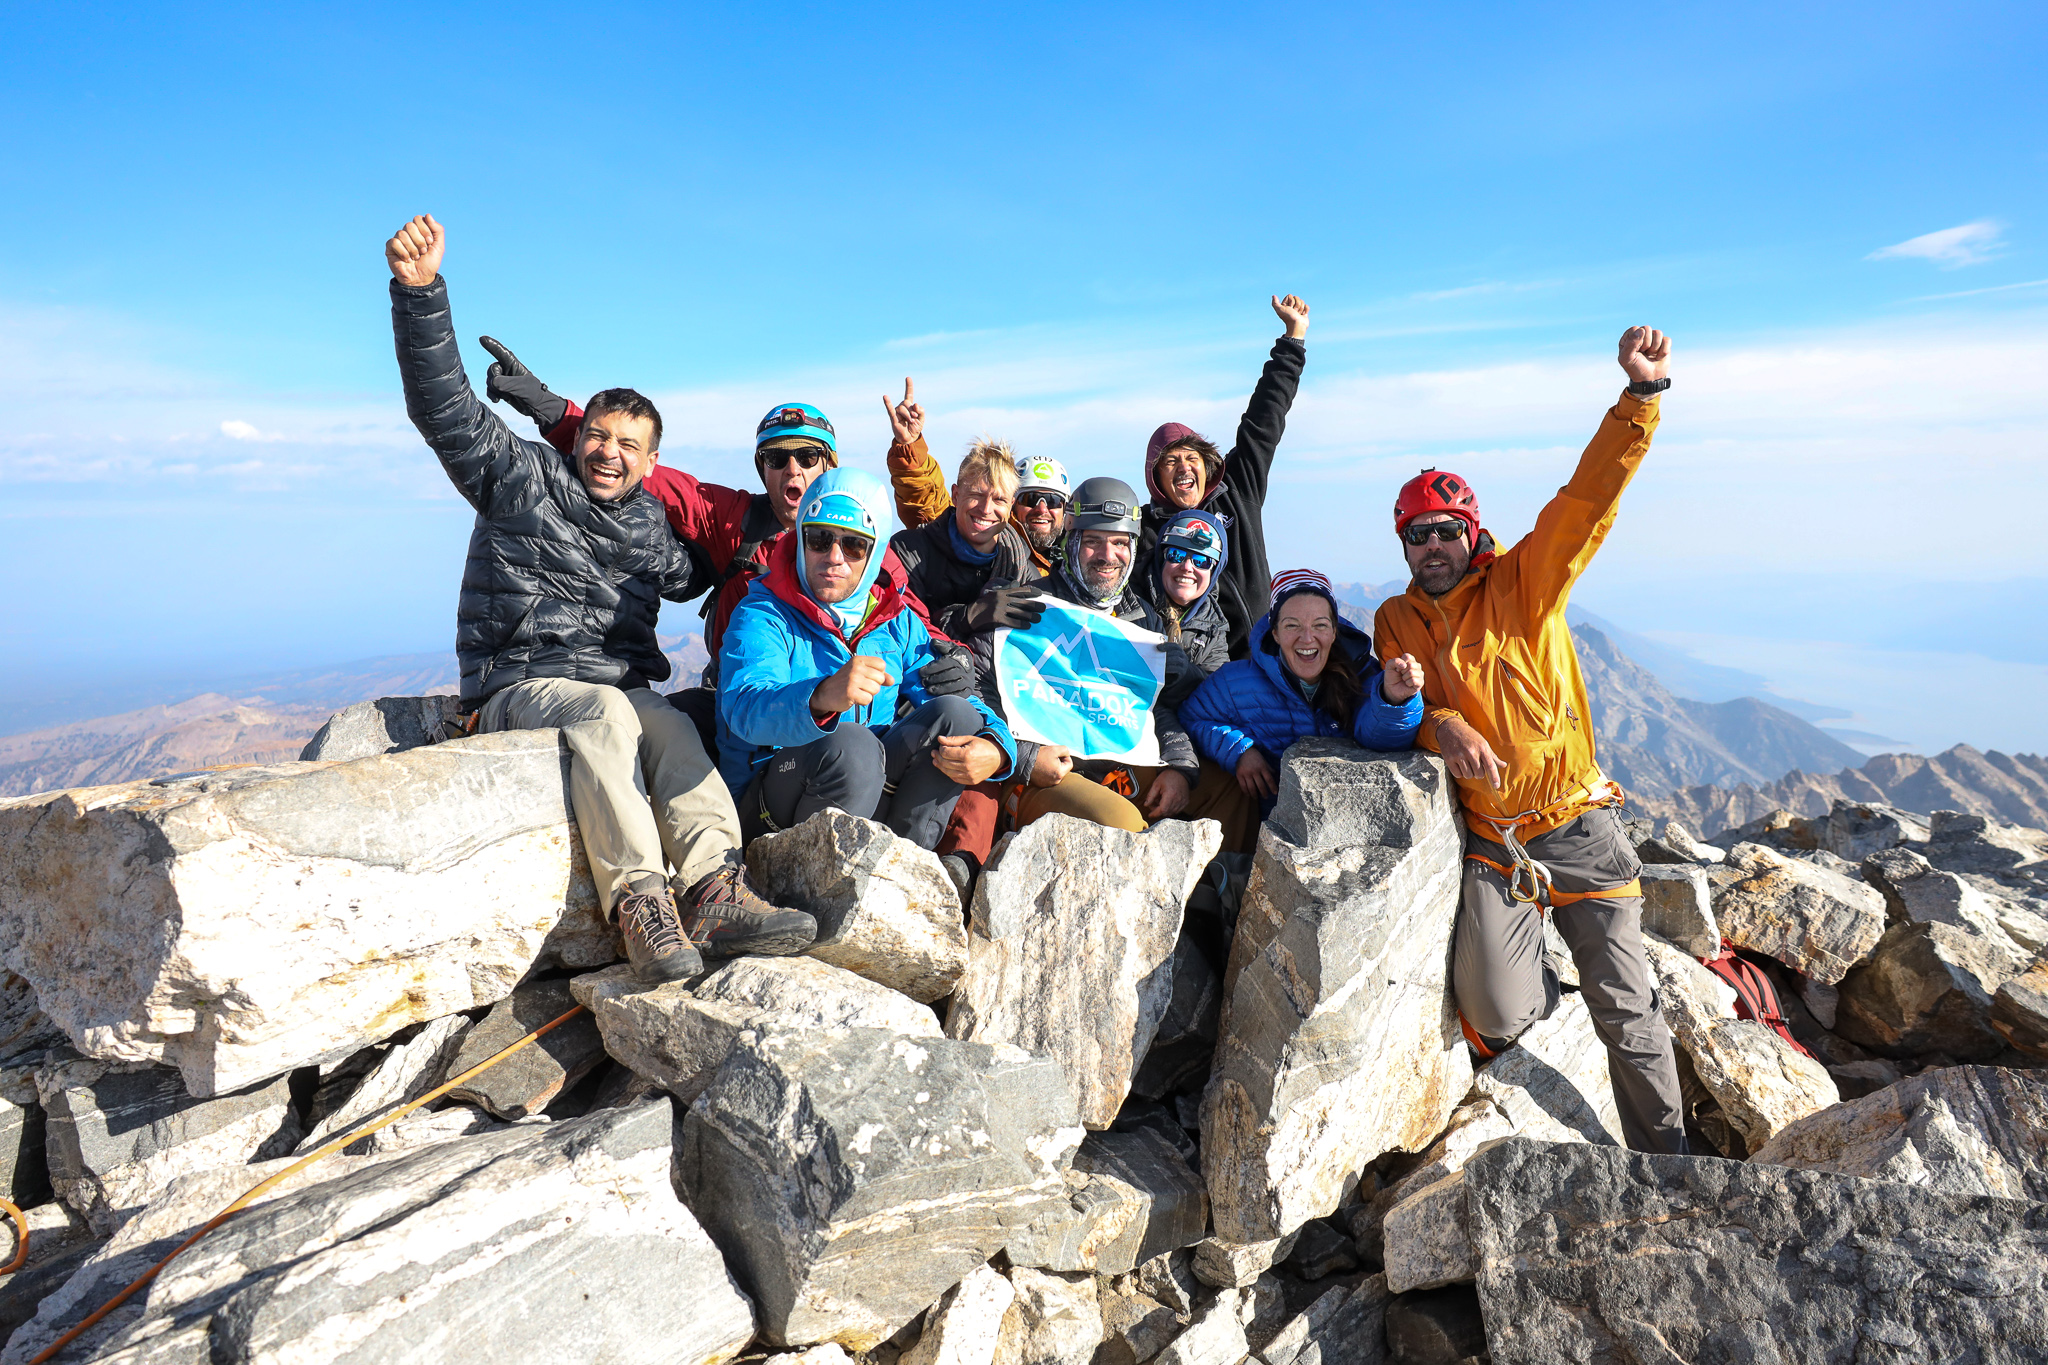 Group photo on top of the Grand Teton